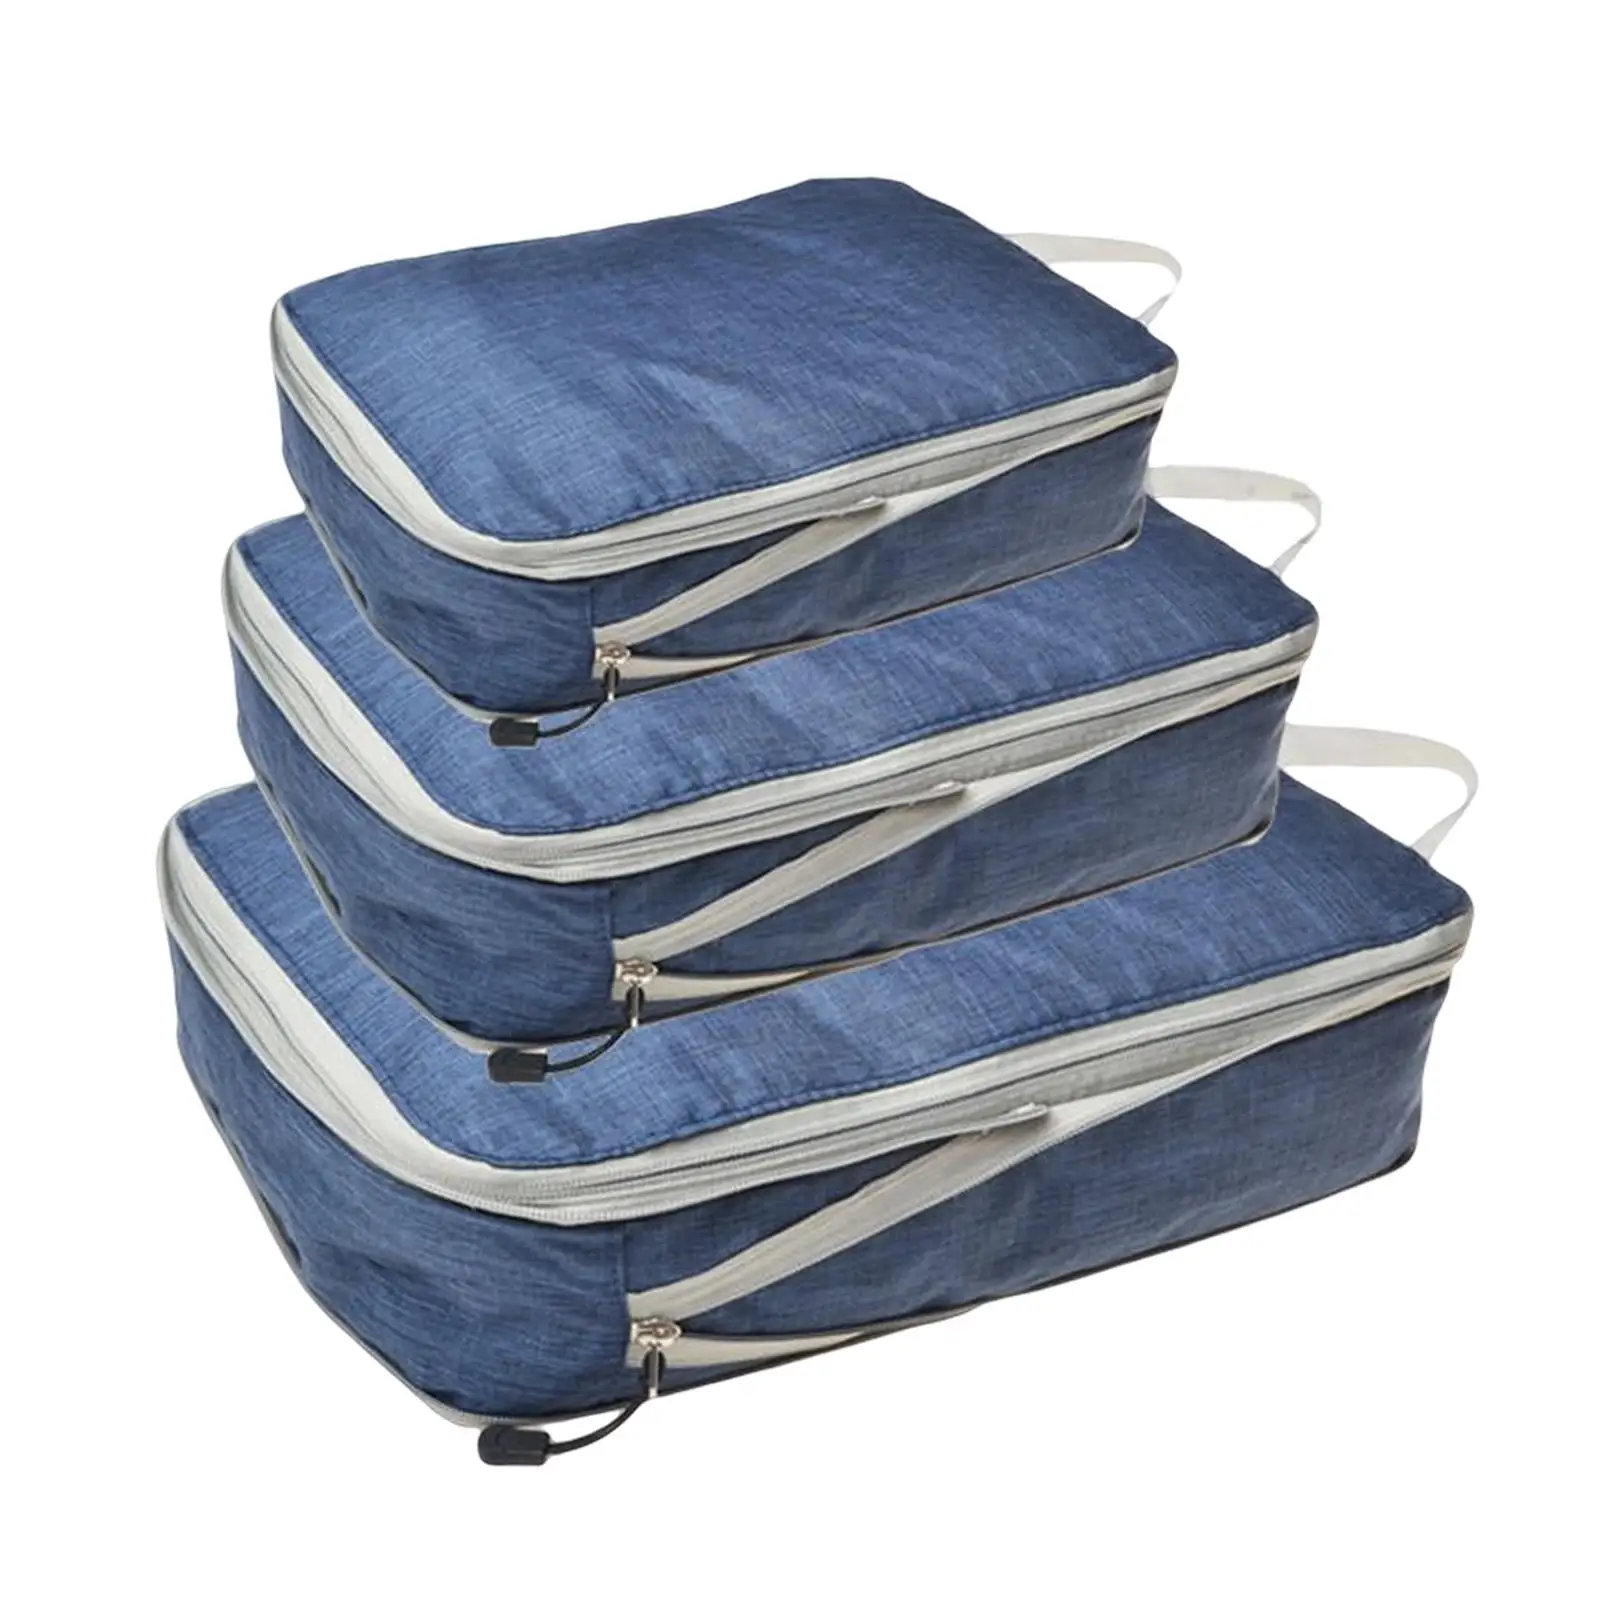 3 Pieces Waterproof Luggage Organiser Lightweight Clothes Storage Bags